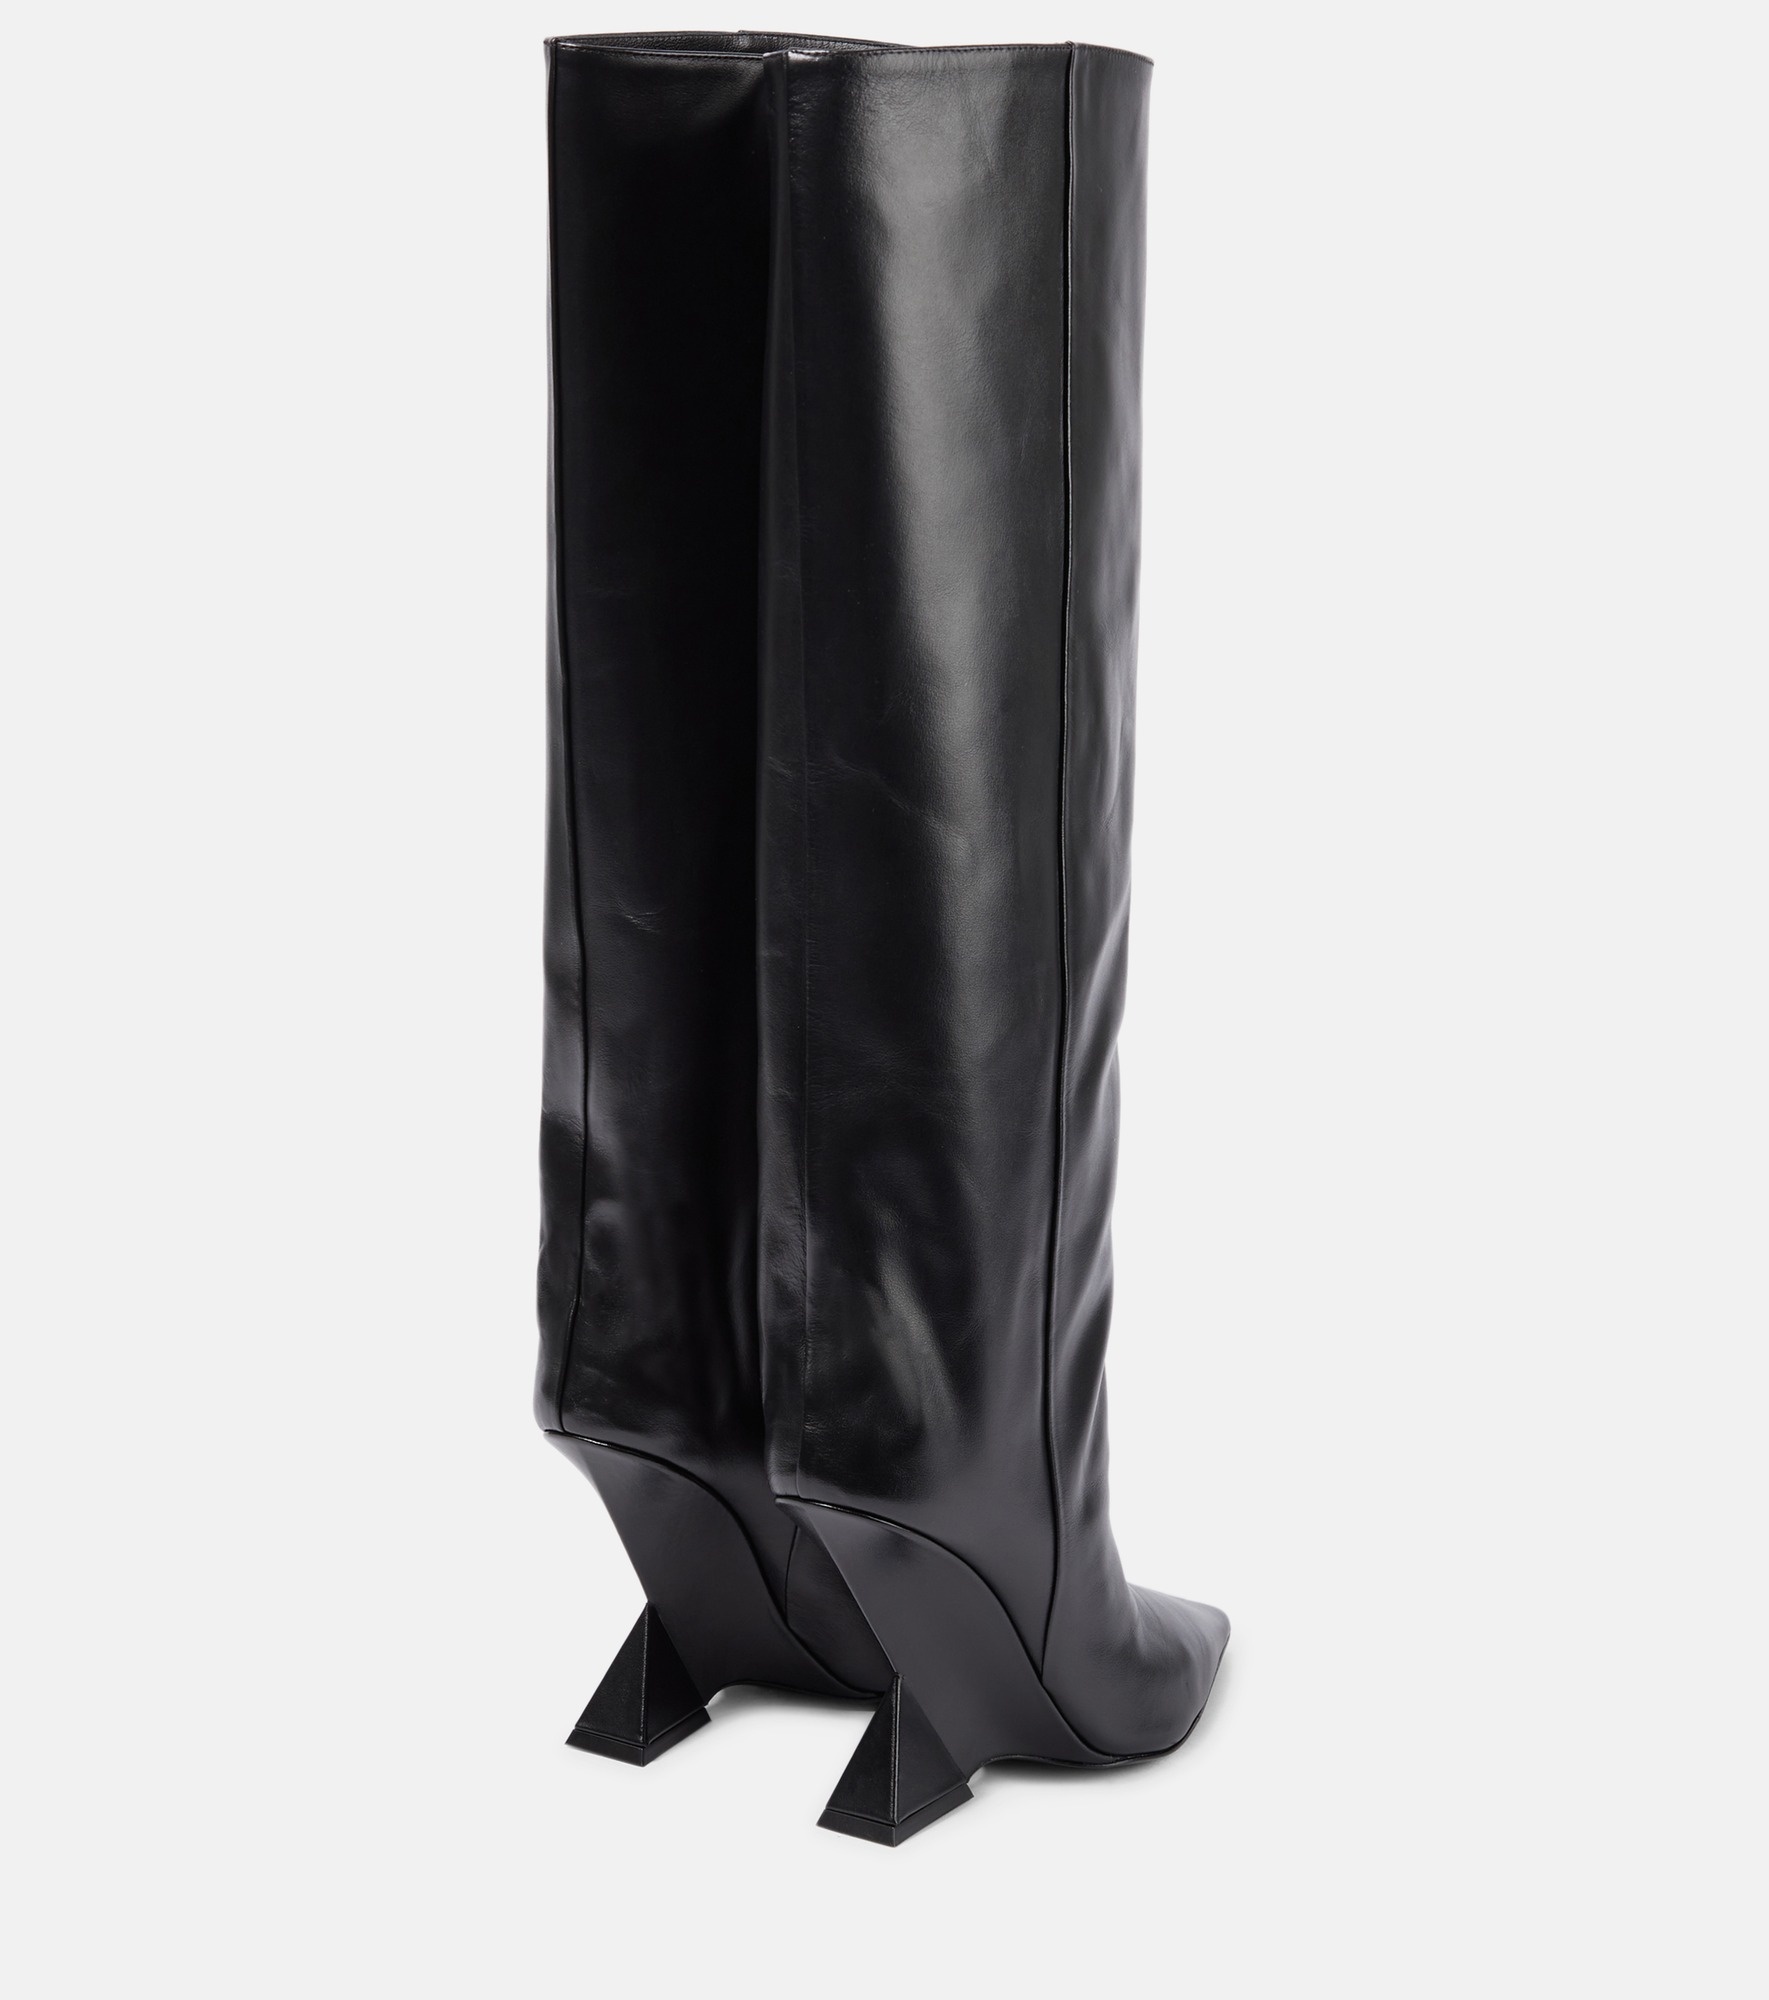 Cheope leather knee-high boots - 3